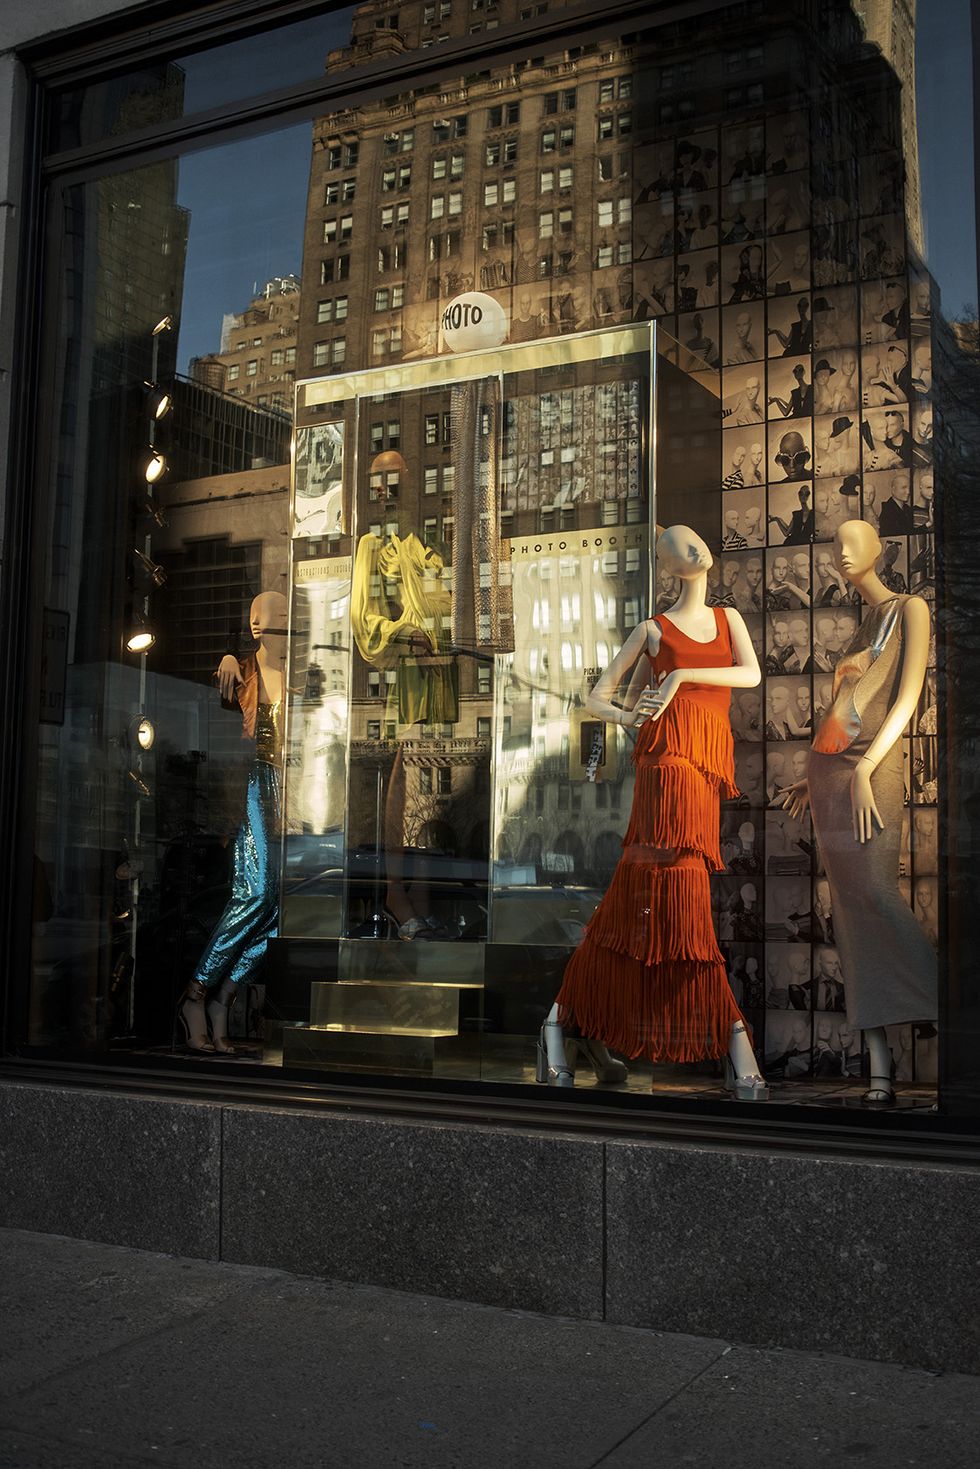 10 Things You Never Knew About Bergdorf Goodman – StyleCaster